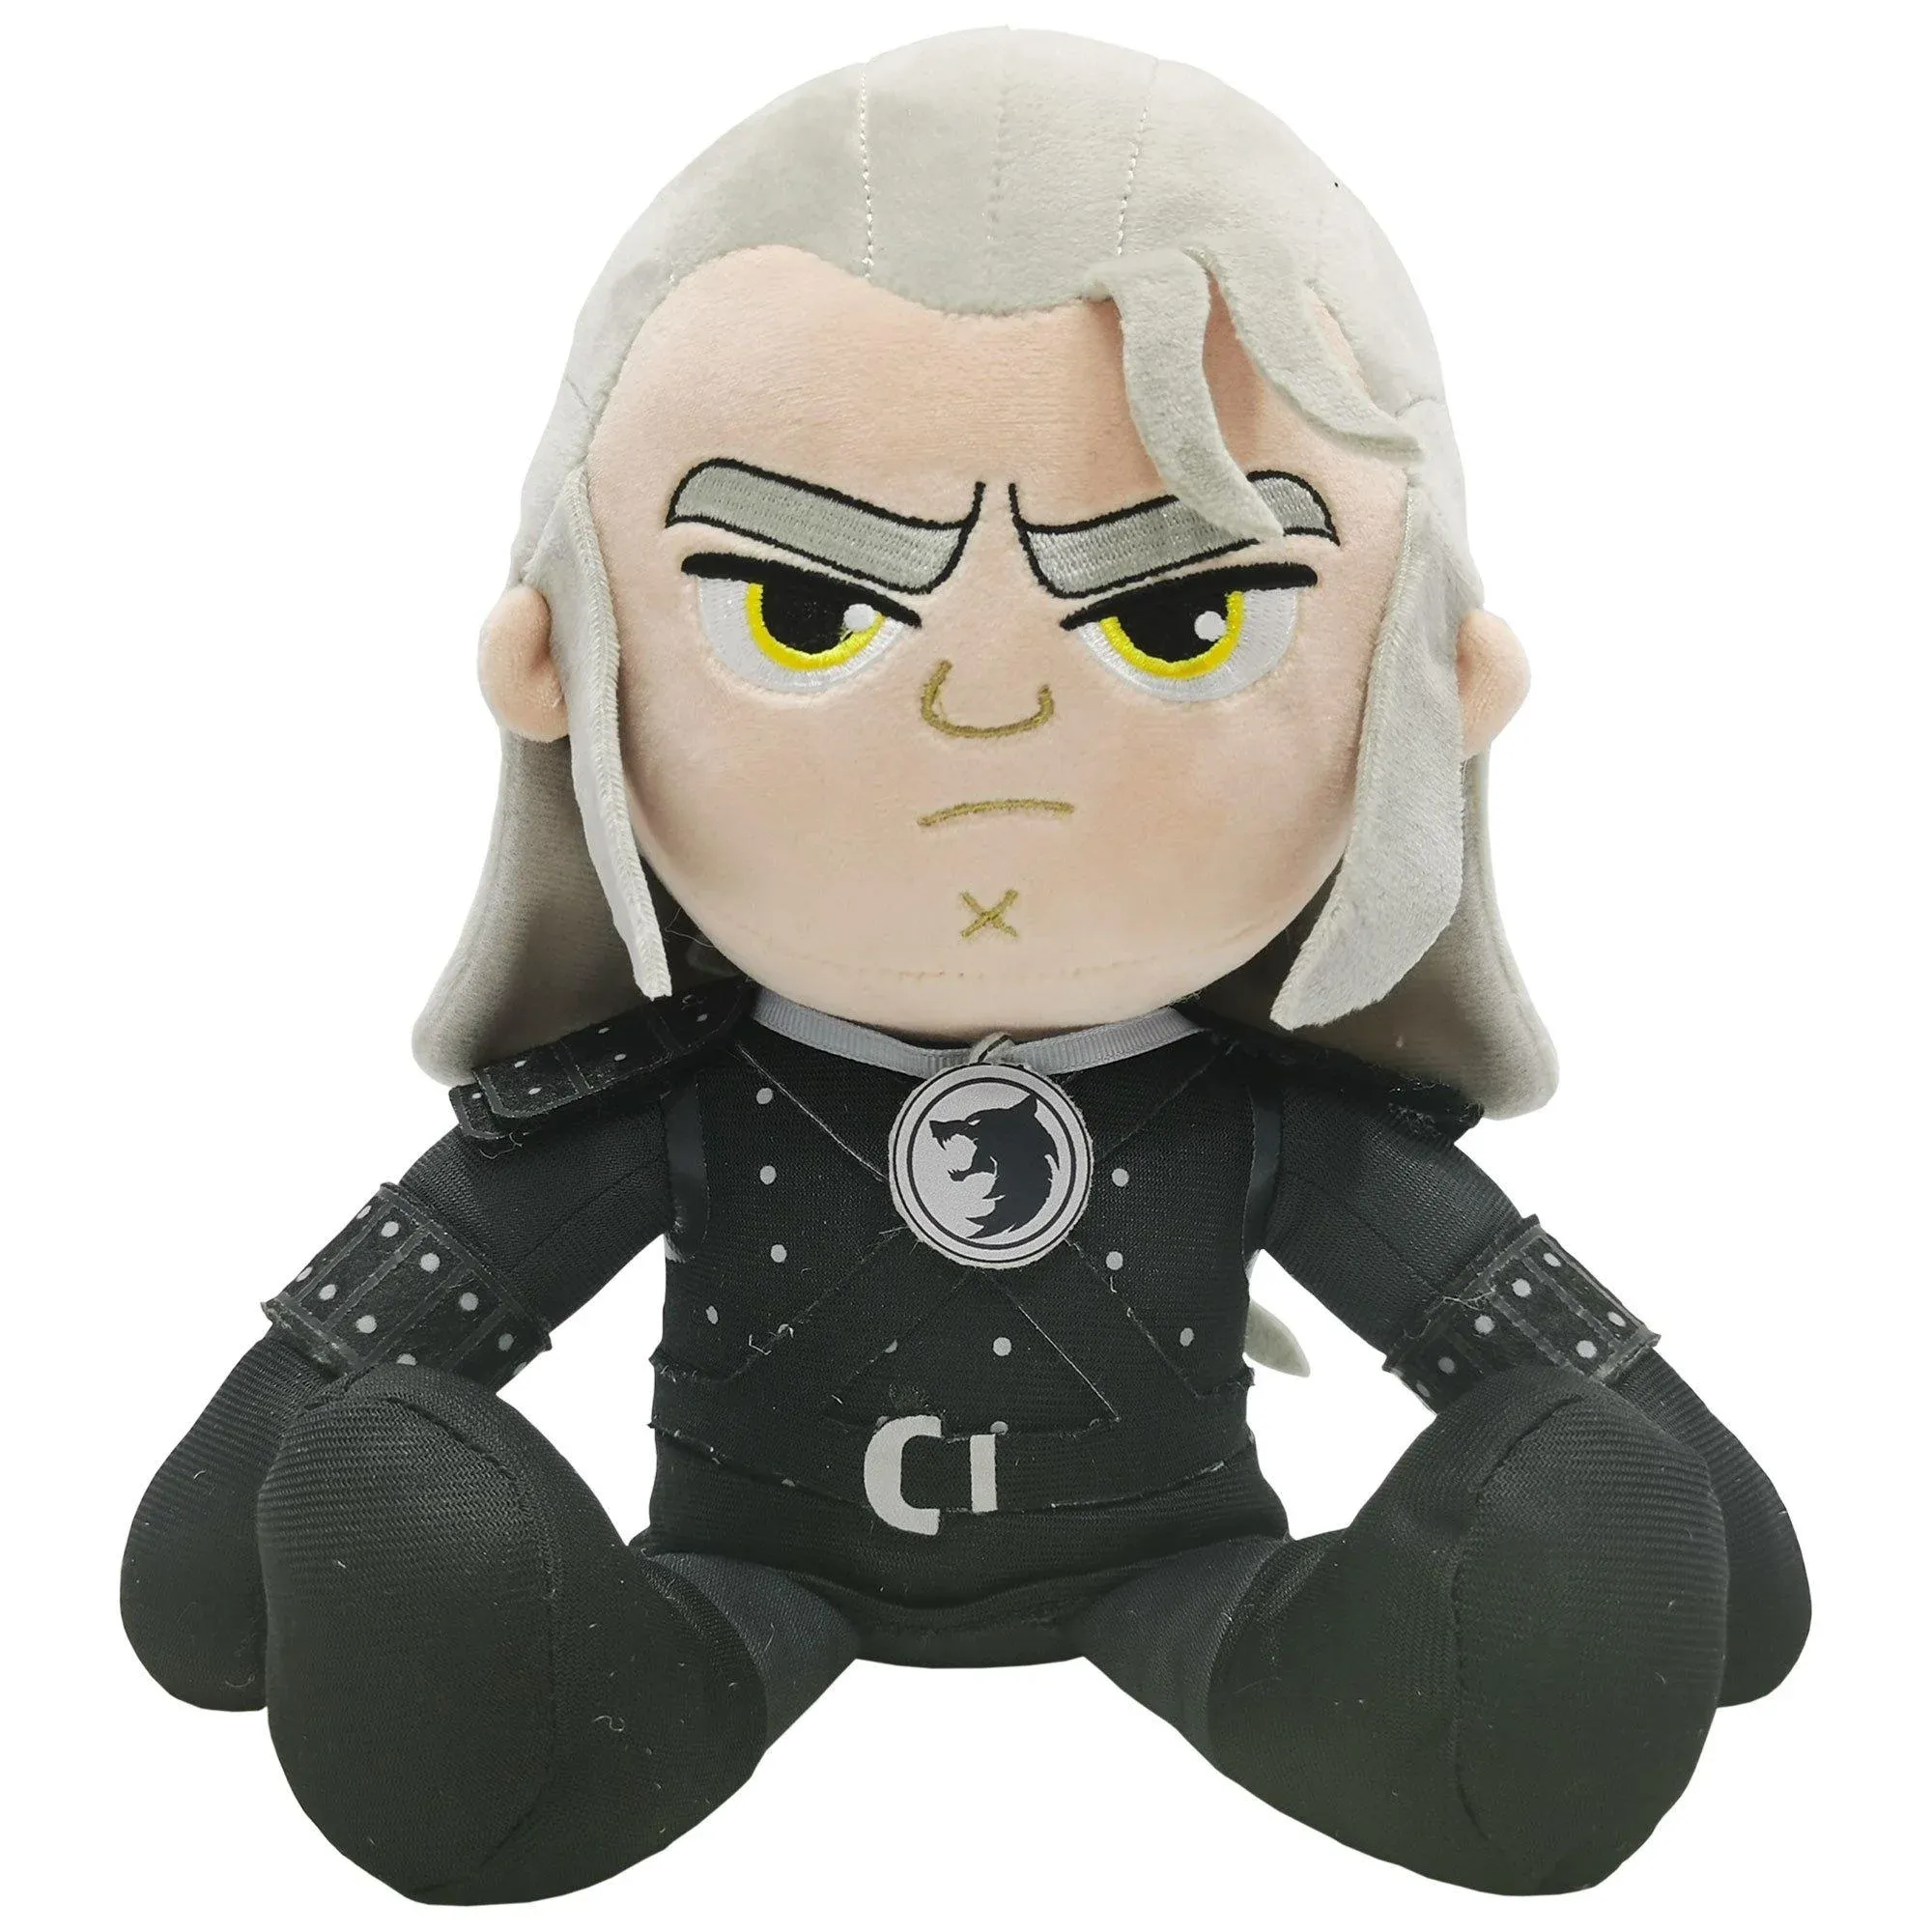 The Witcher Geralt of Rivia tlaking Cavill plushie